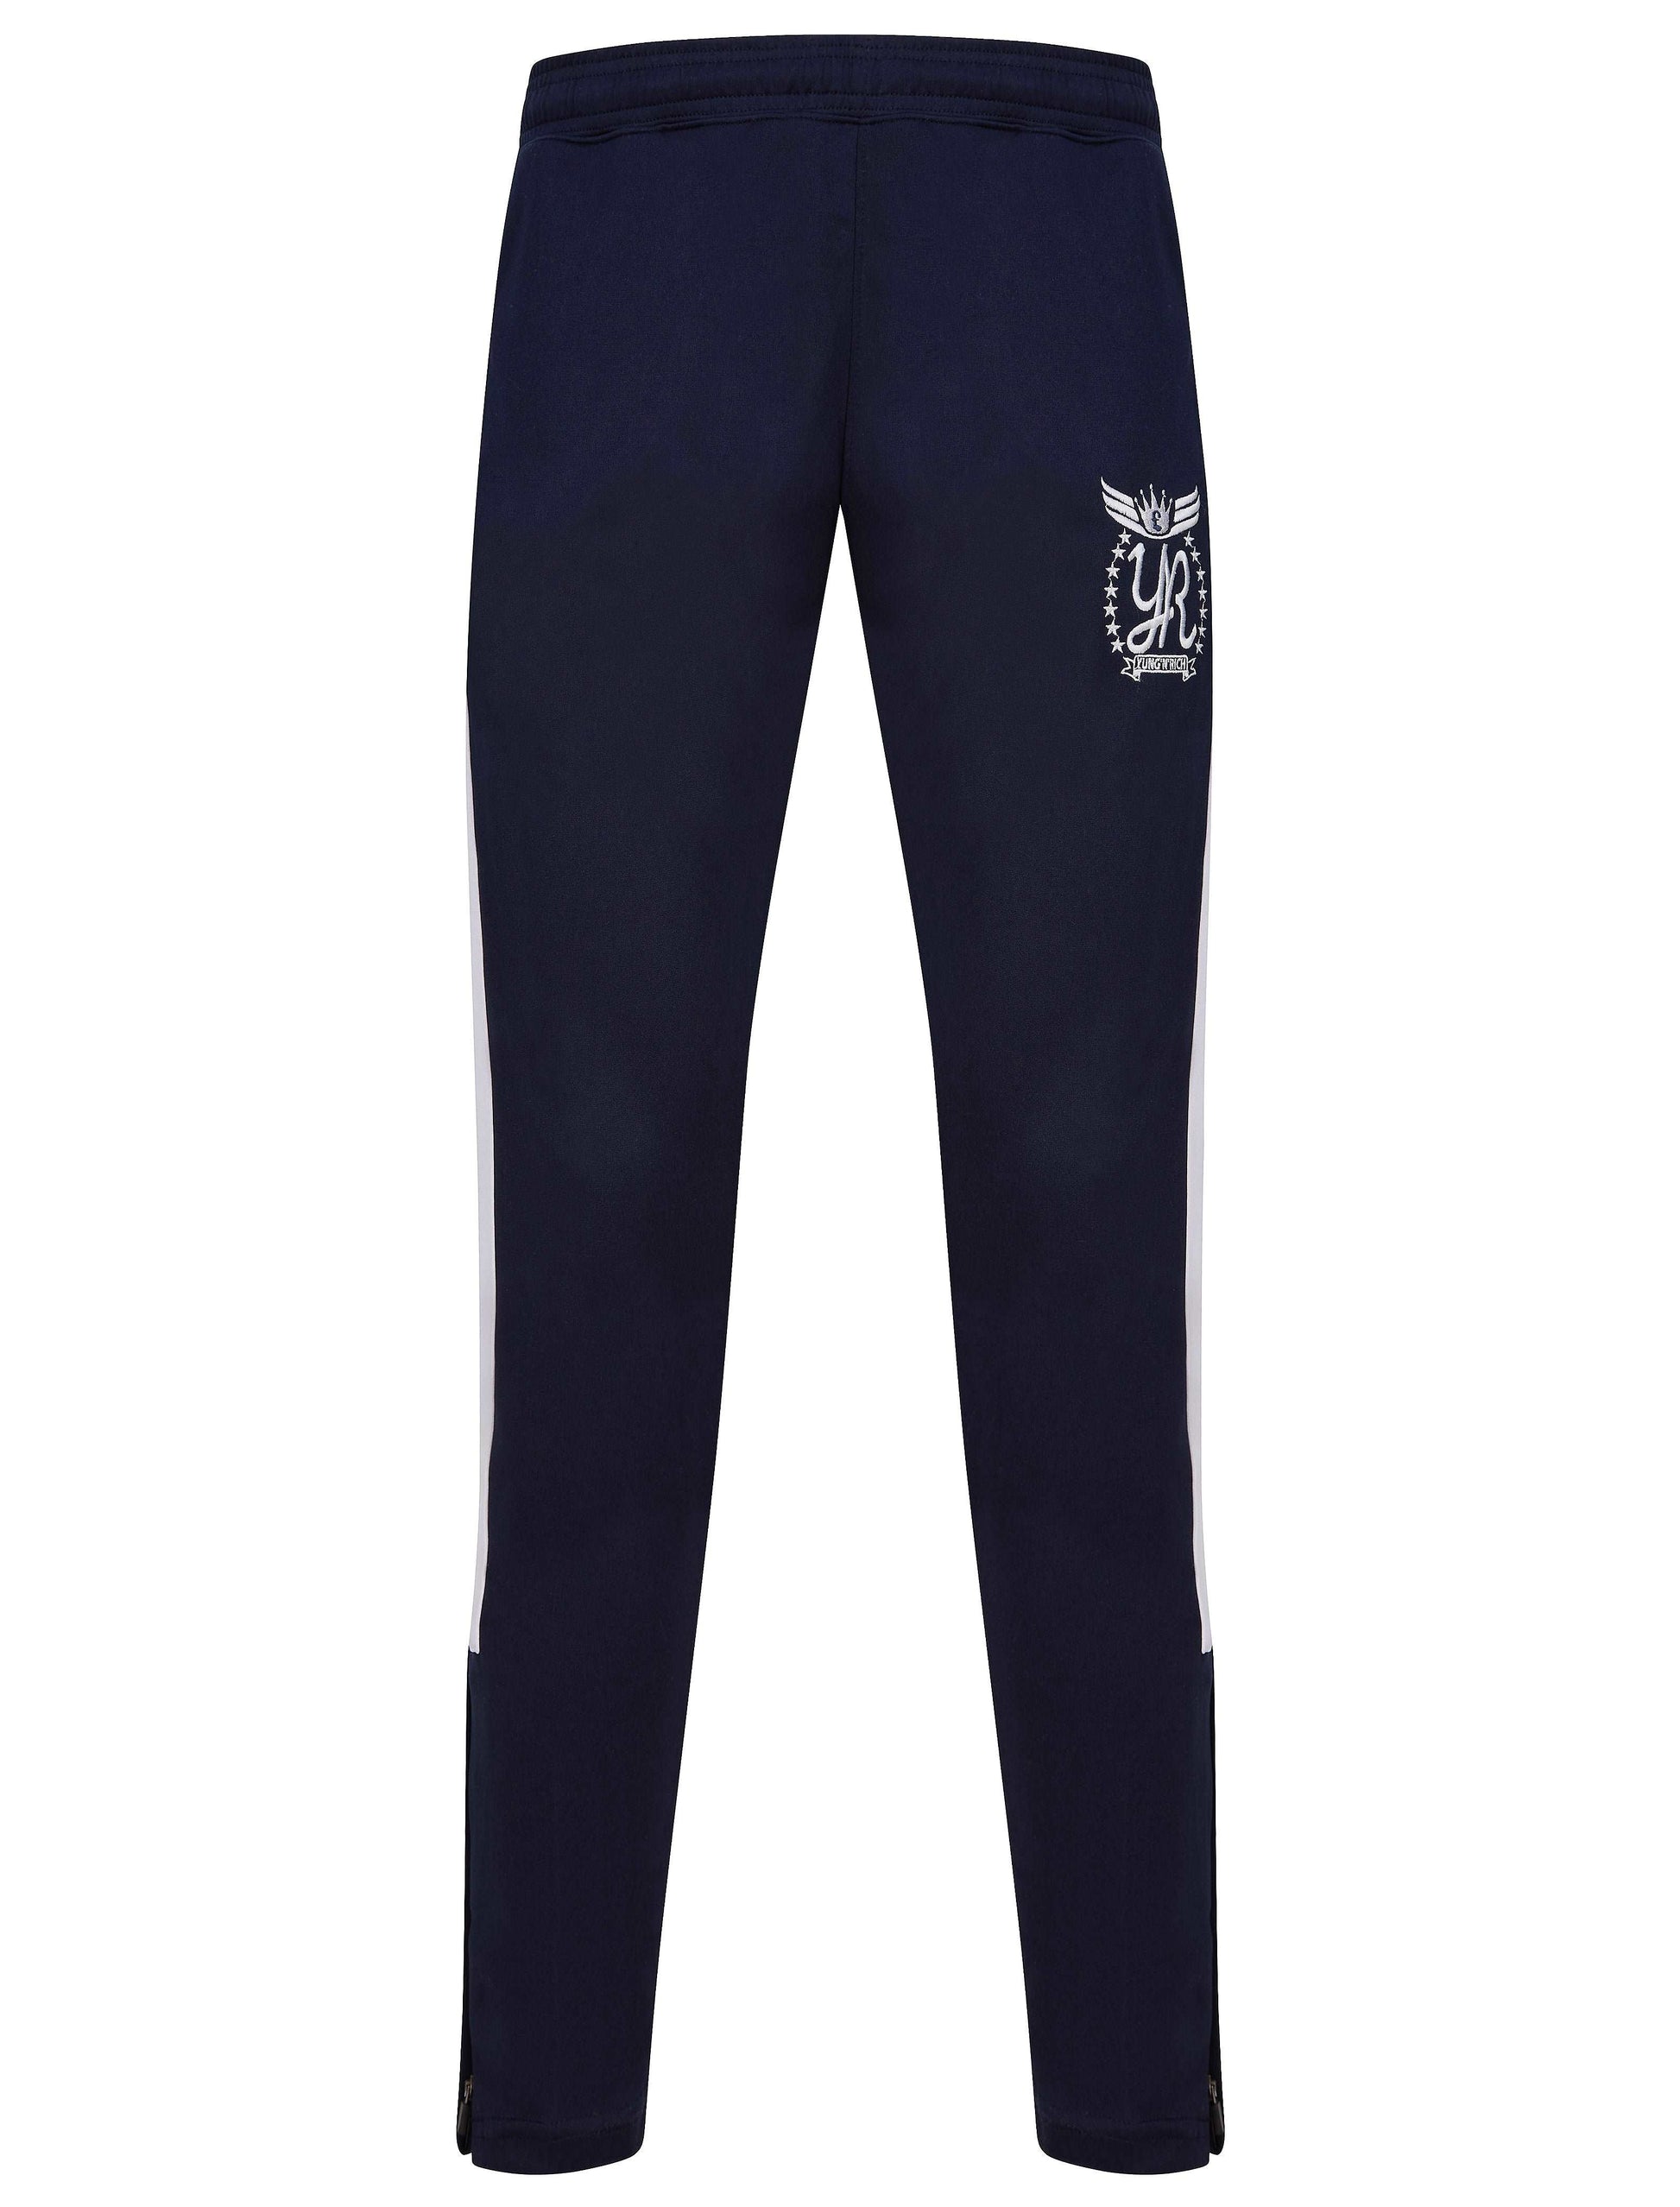 YUNGNRICH WOMENS FUNNEL NECK CONTRAST PANEL TRACKSUIT BLUE & WHITE BOTTOMS